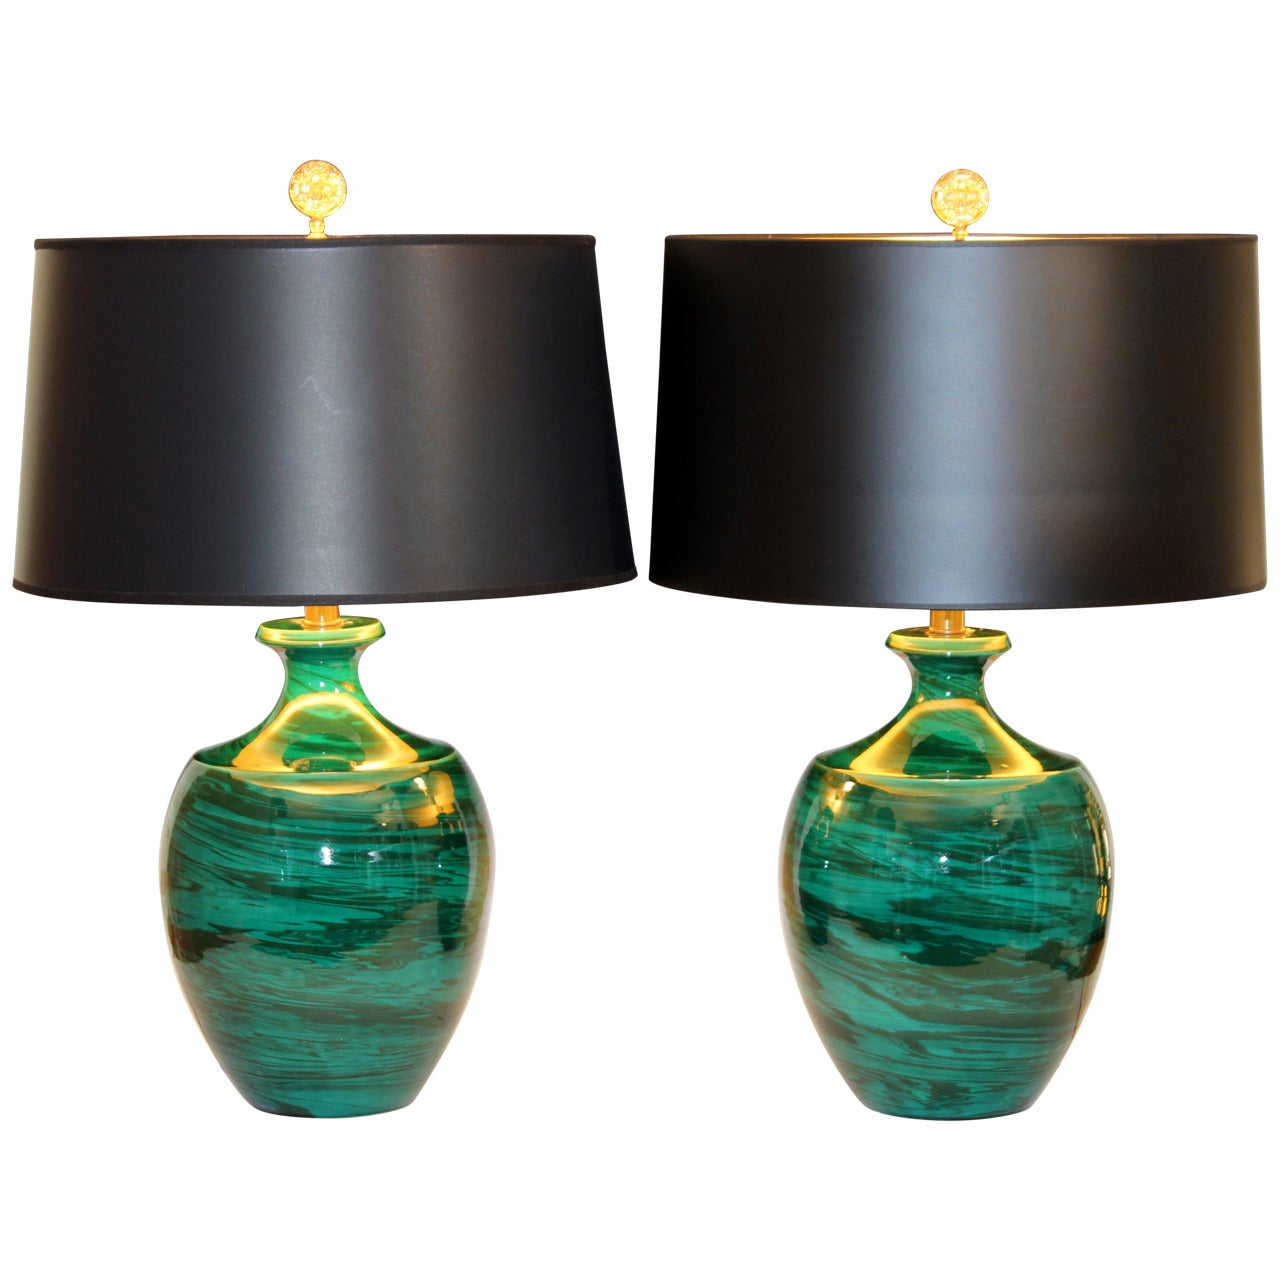 Pair of Vintage Bitossi Art Pottery Green Marbleized Raymor Lamps For Sale